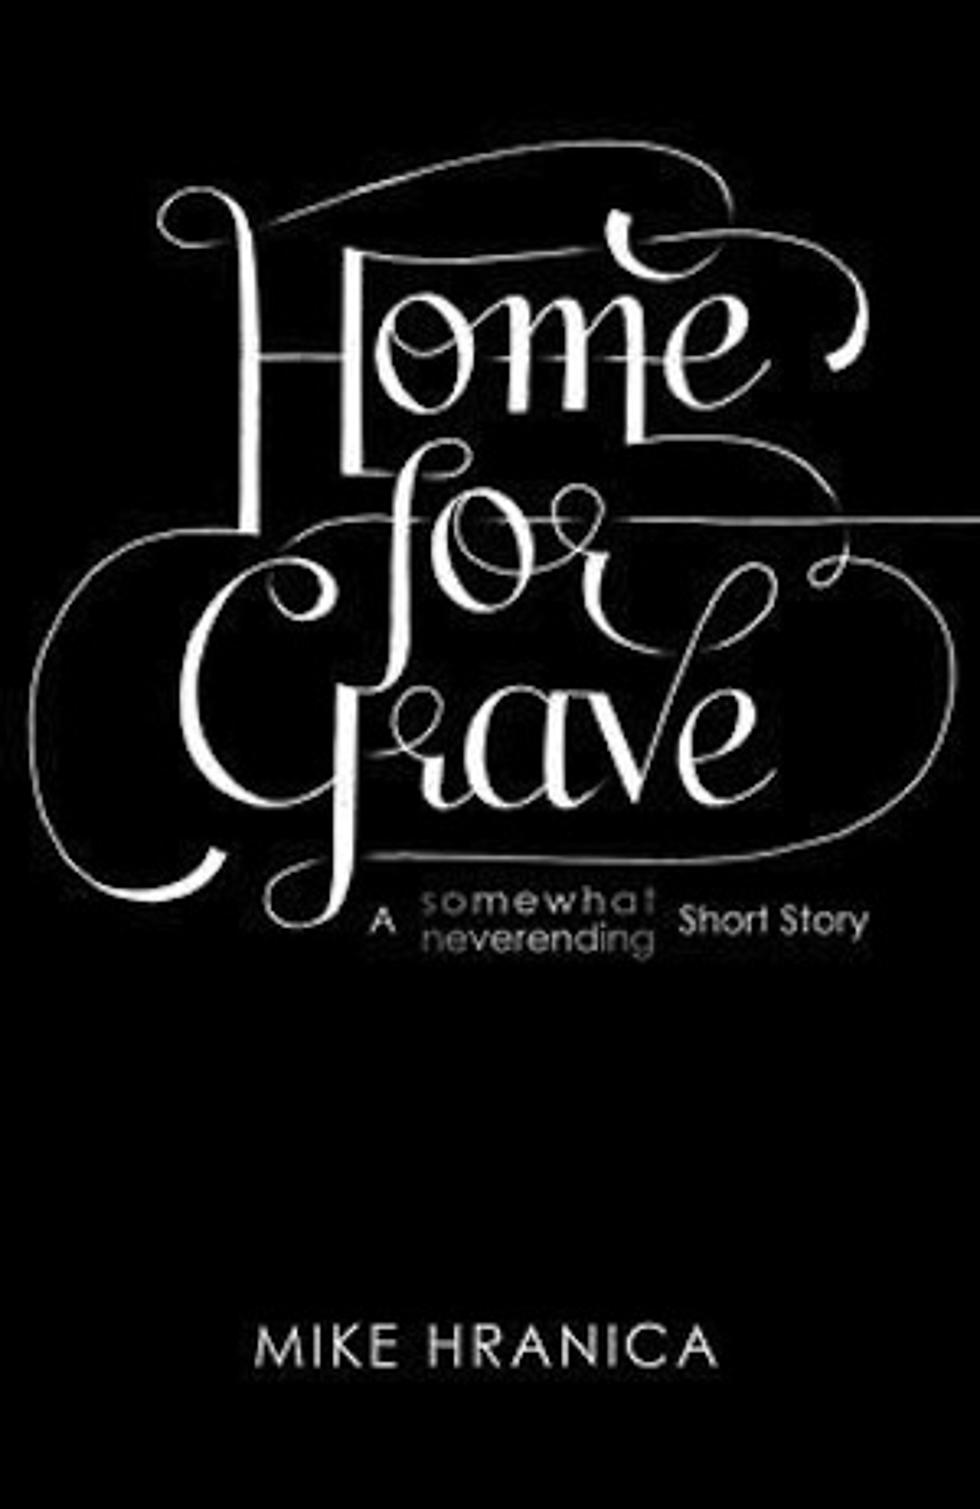 The Devil Wears Prada Frontman Mike Hranica Pens &#8216;Home for Grave&#8217; Book